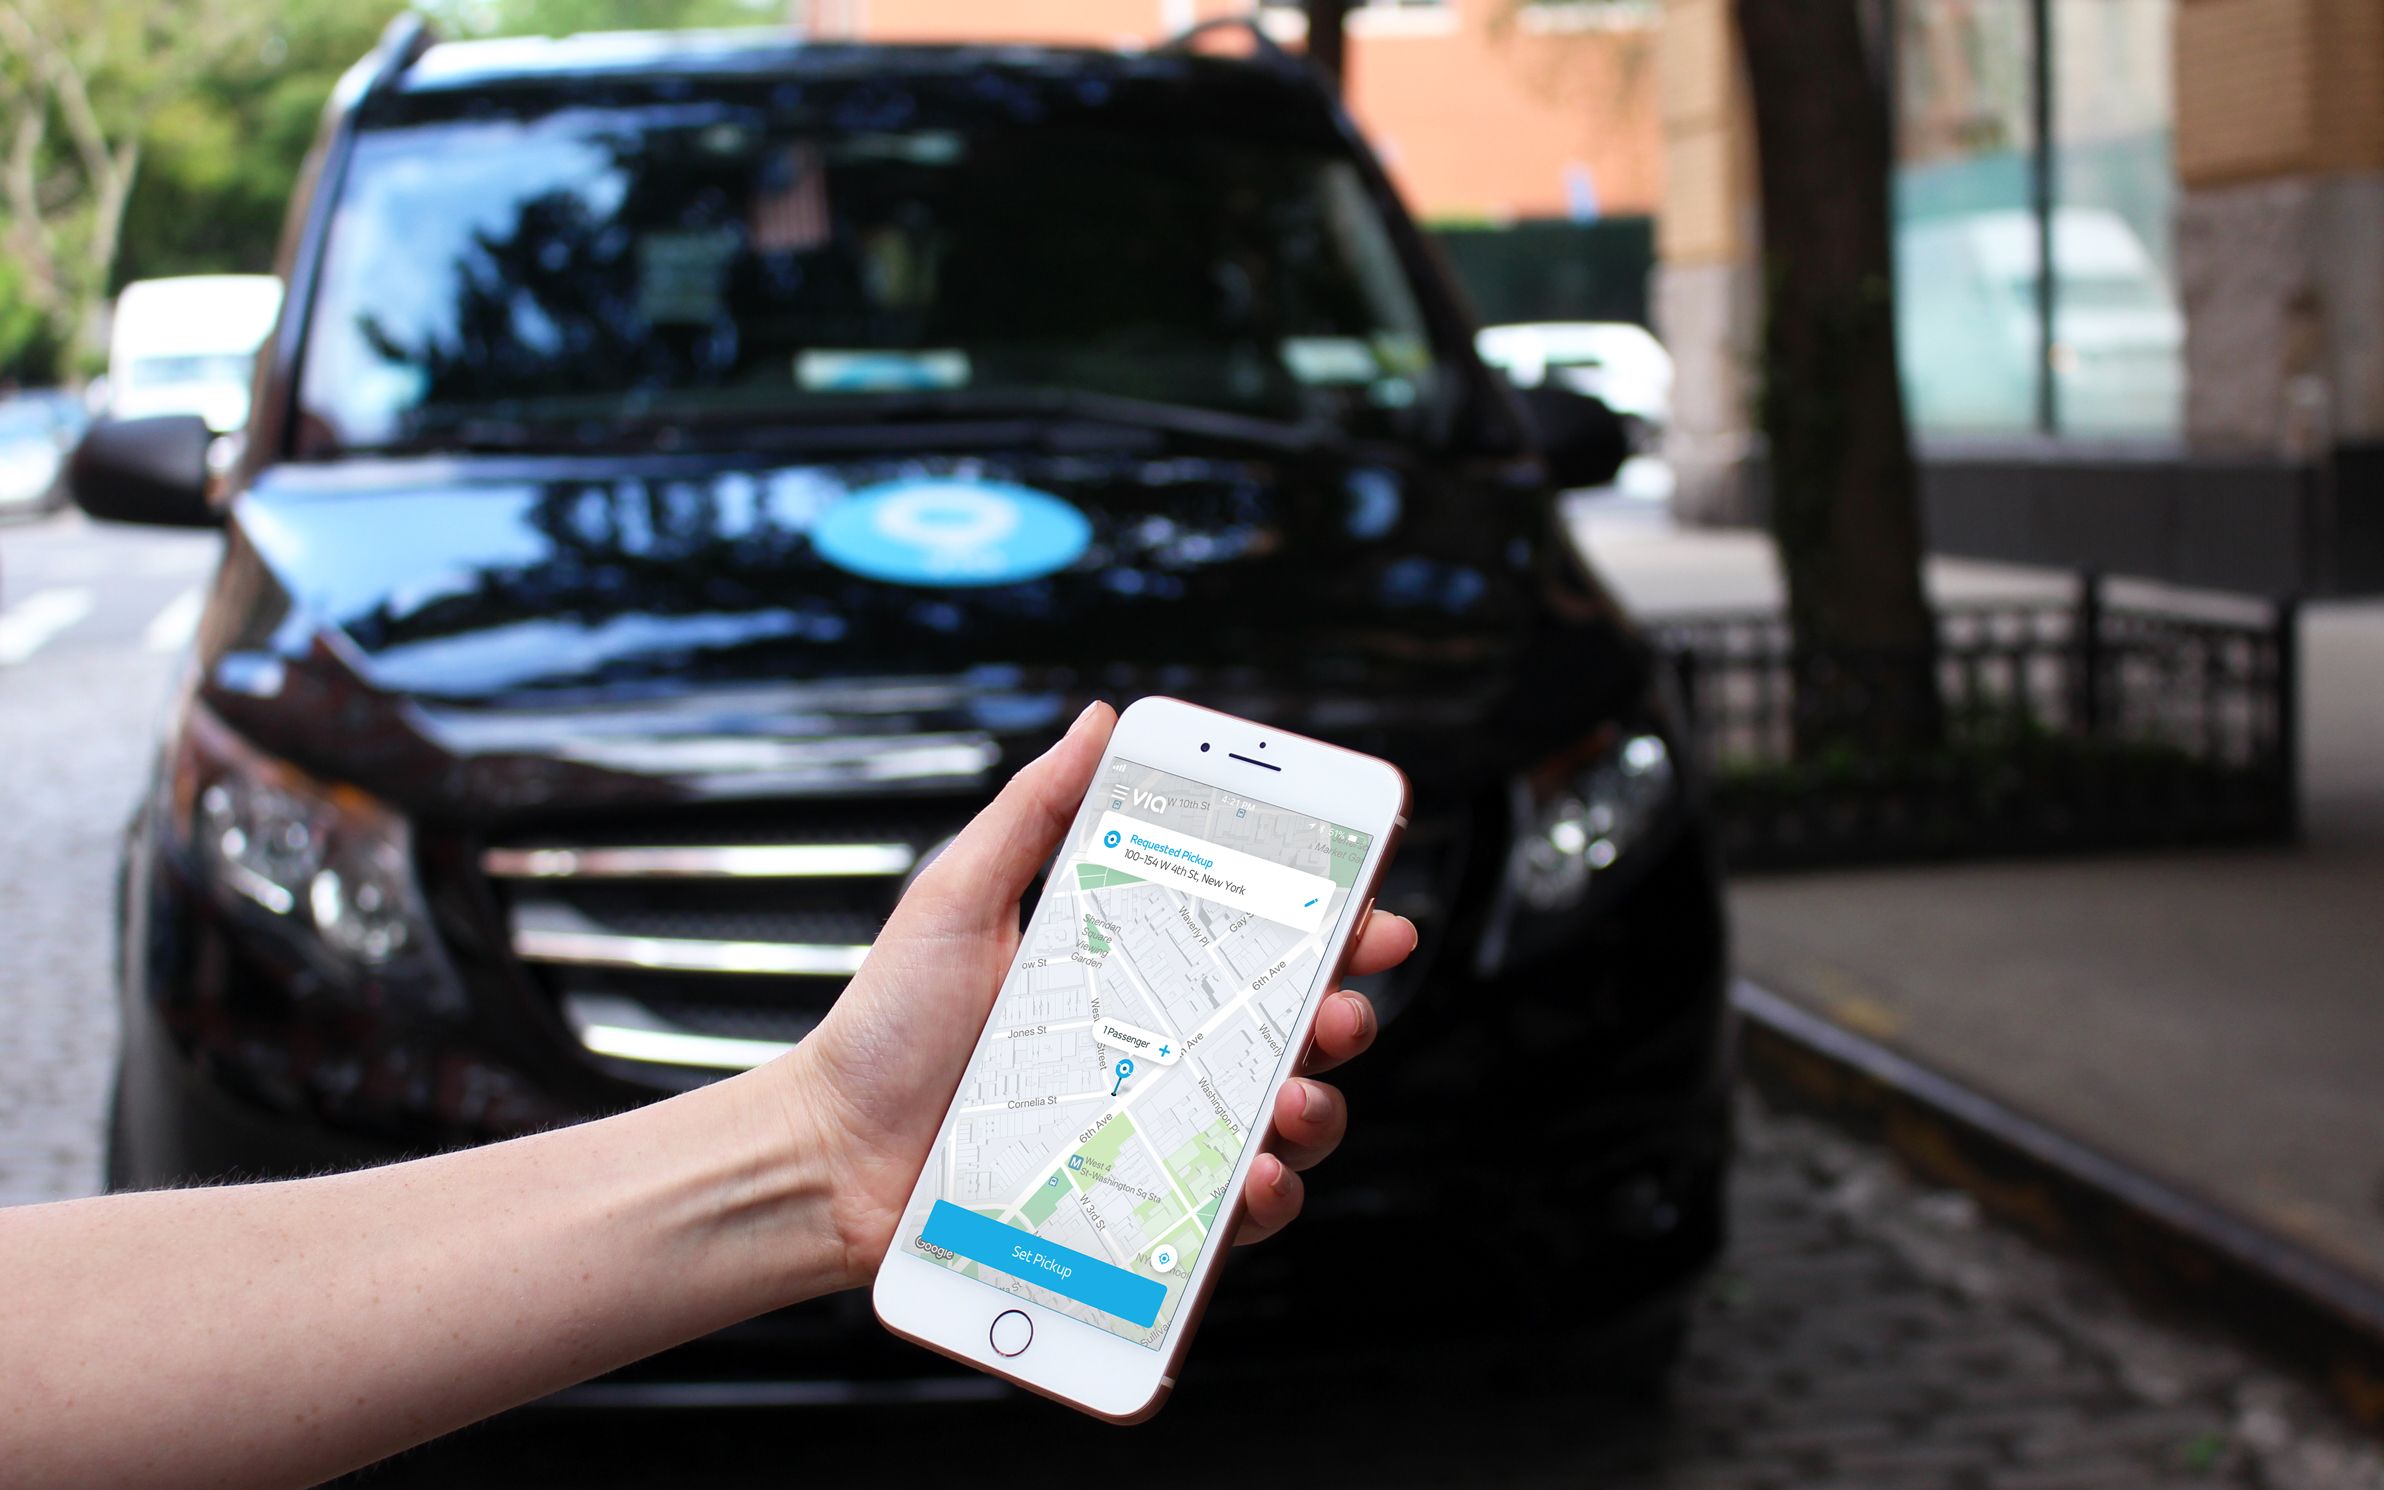 Via and Uber join forces to provide cost-efficient transportation